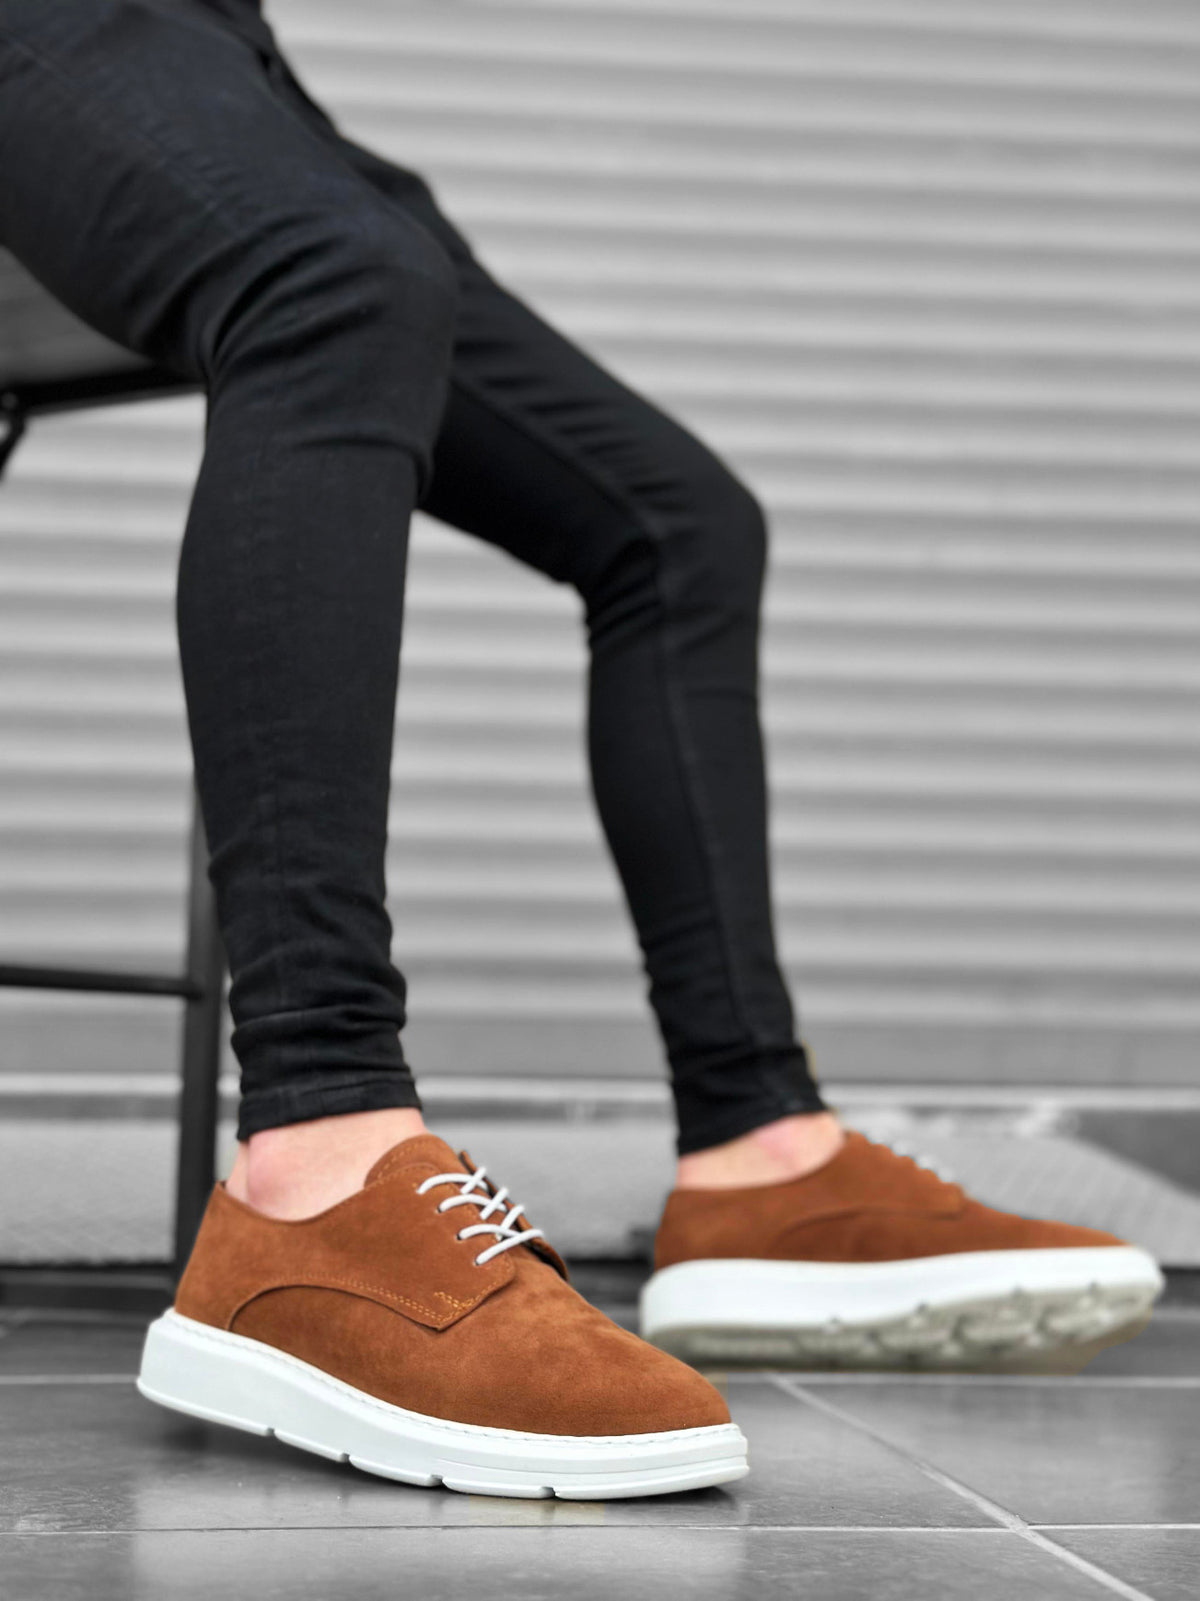 BA0003 Lace-Up Suede Classic Tan White High Sole Casual Men's Sneakers Shoes - STREETMODE™